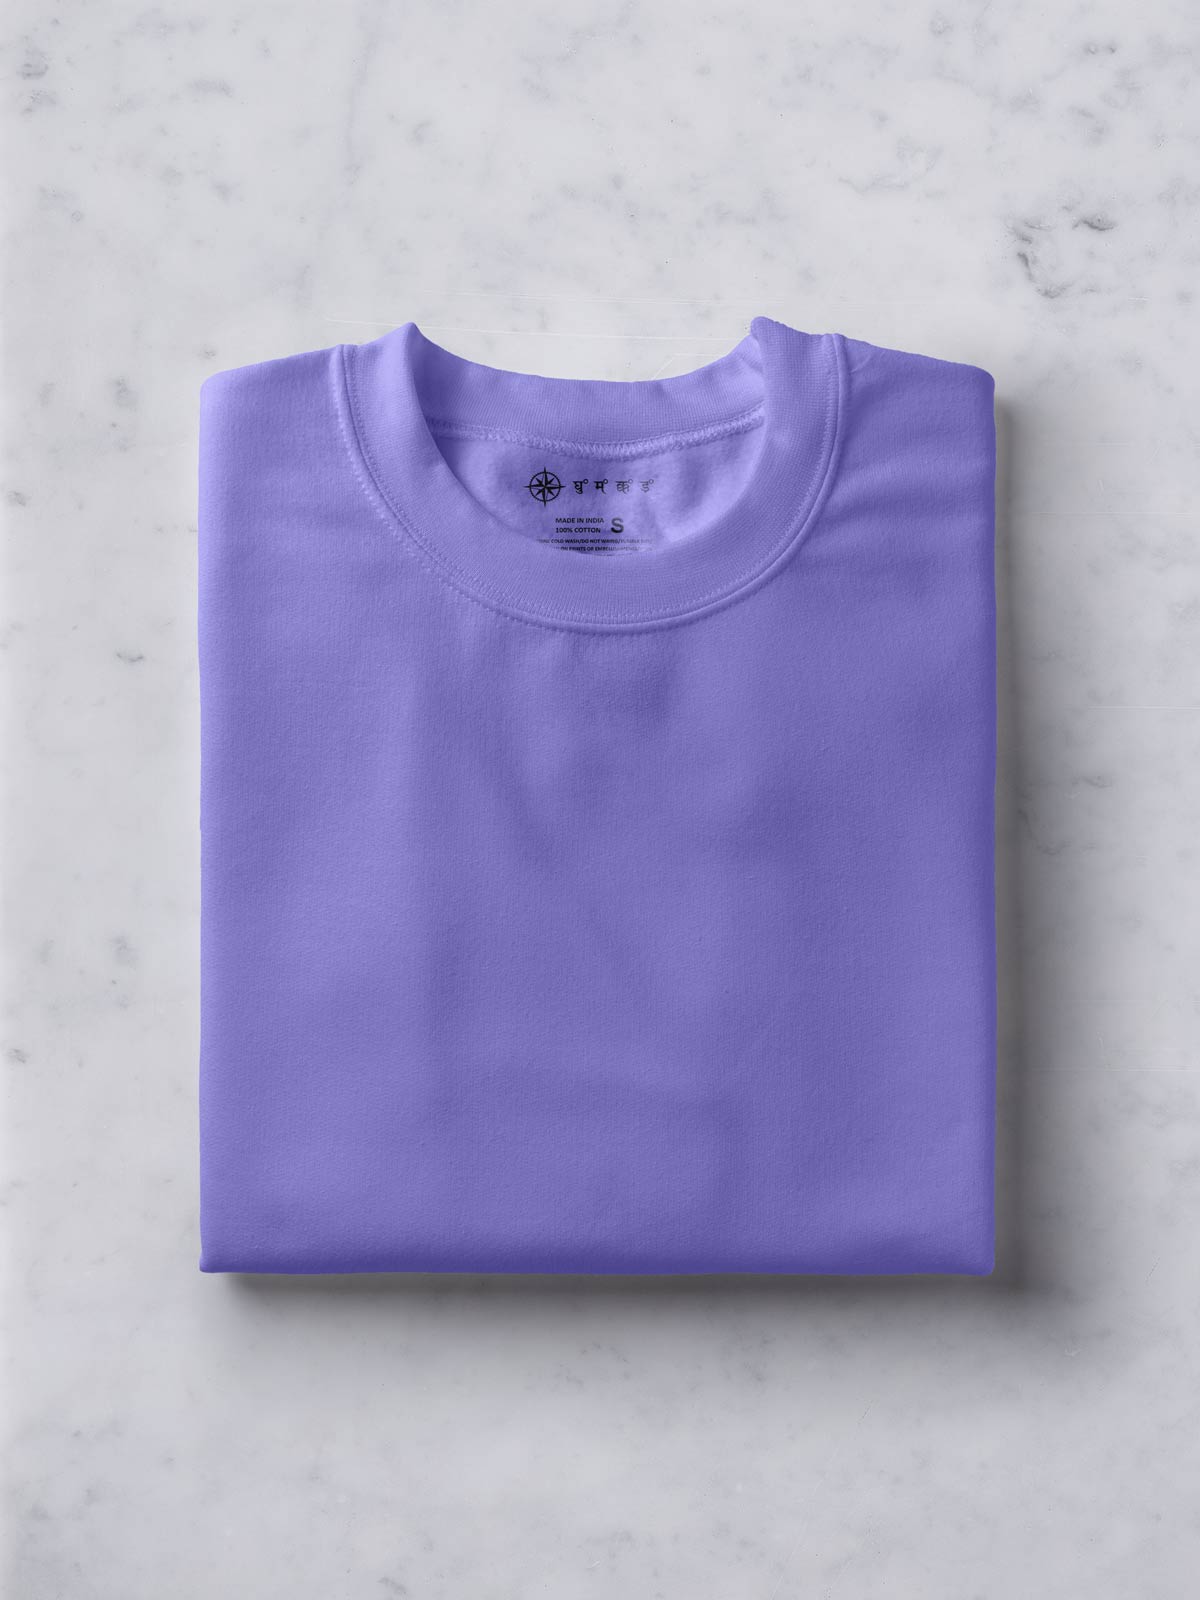 Lilac-t-shirt-for-men by Ghumakkad